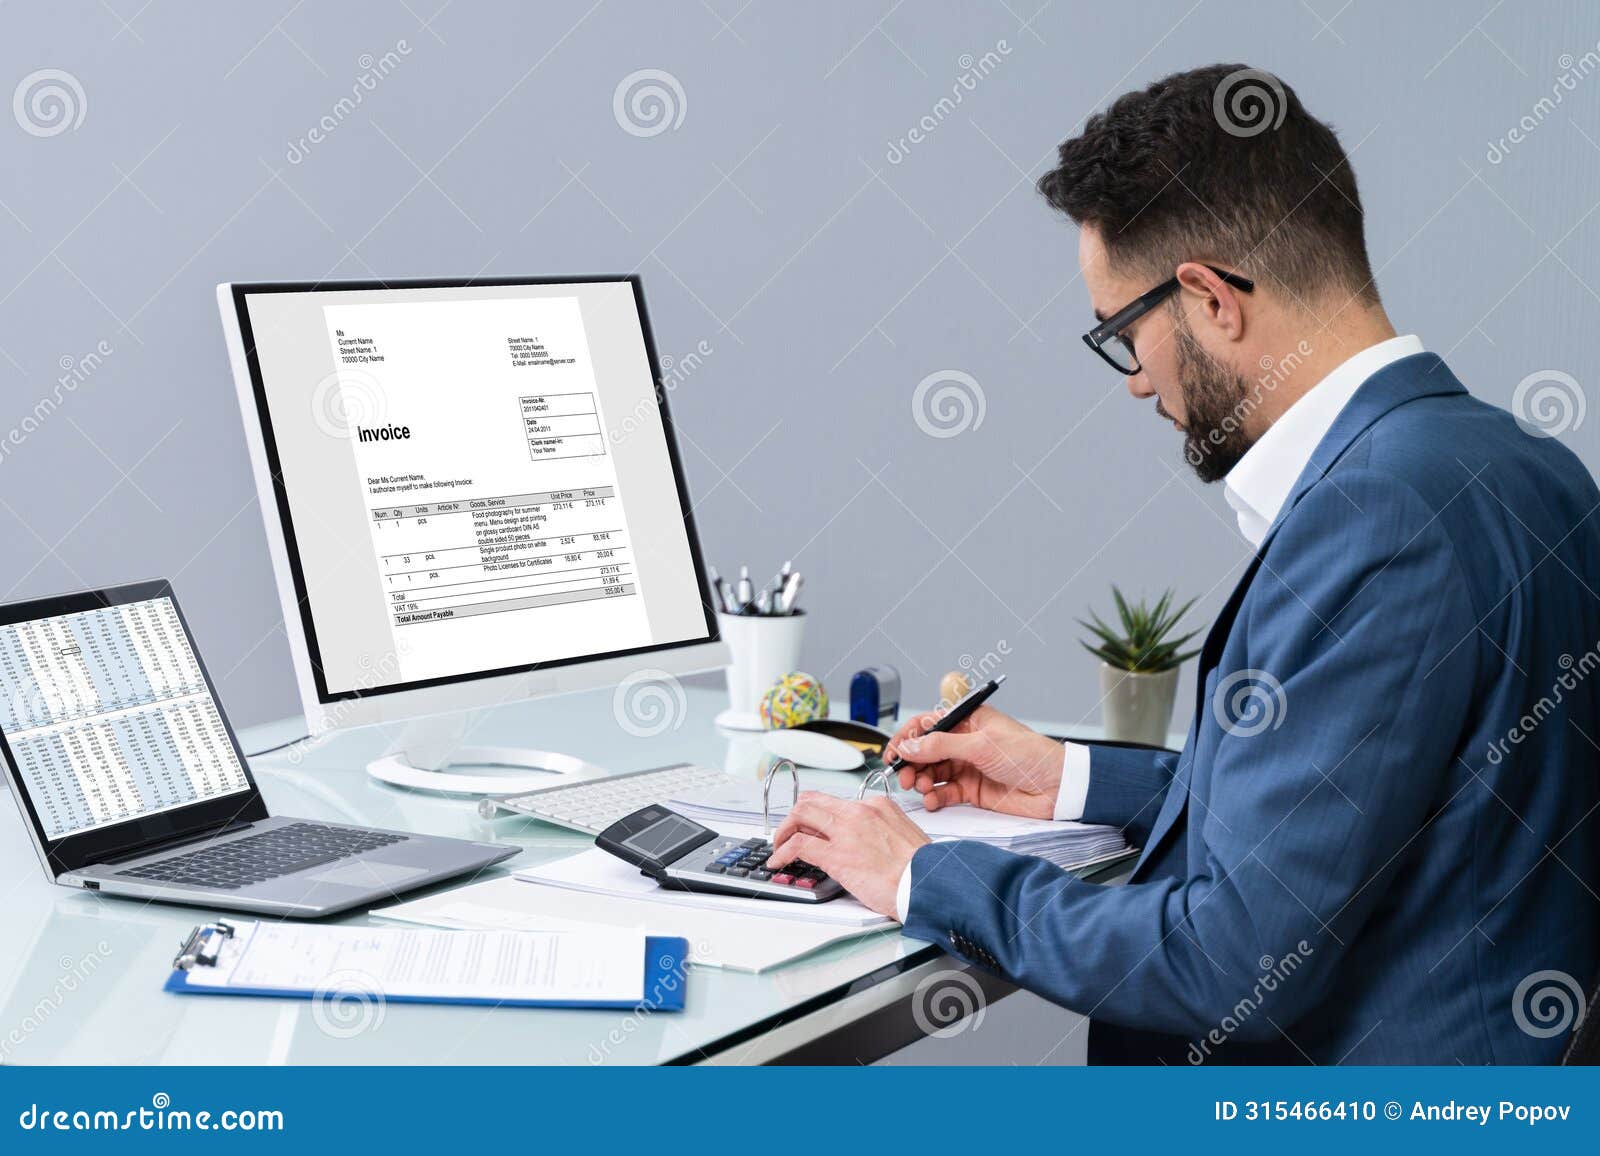 accountant using computer to manage invoices